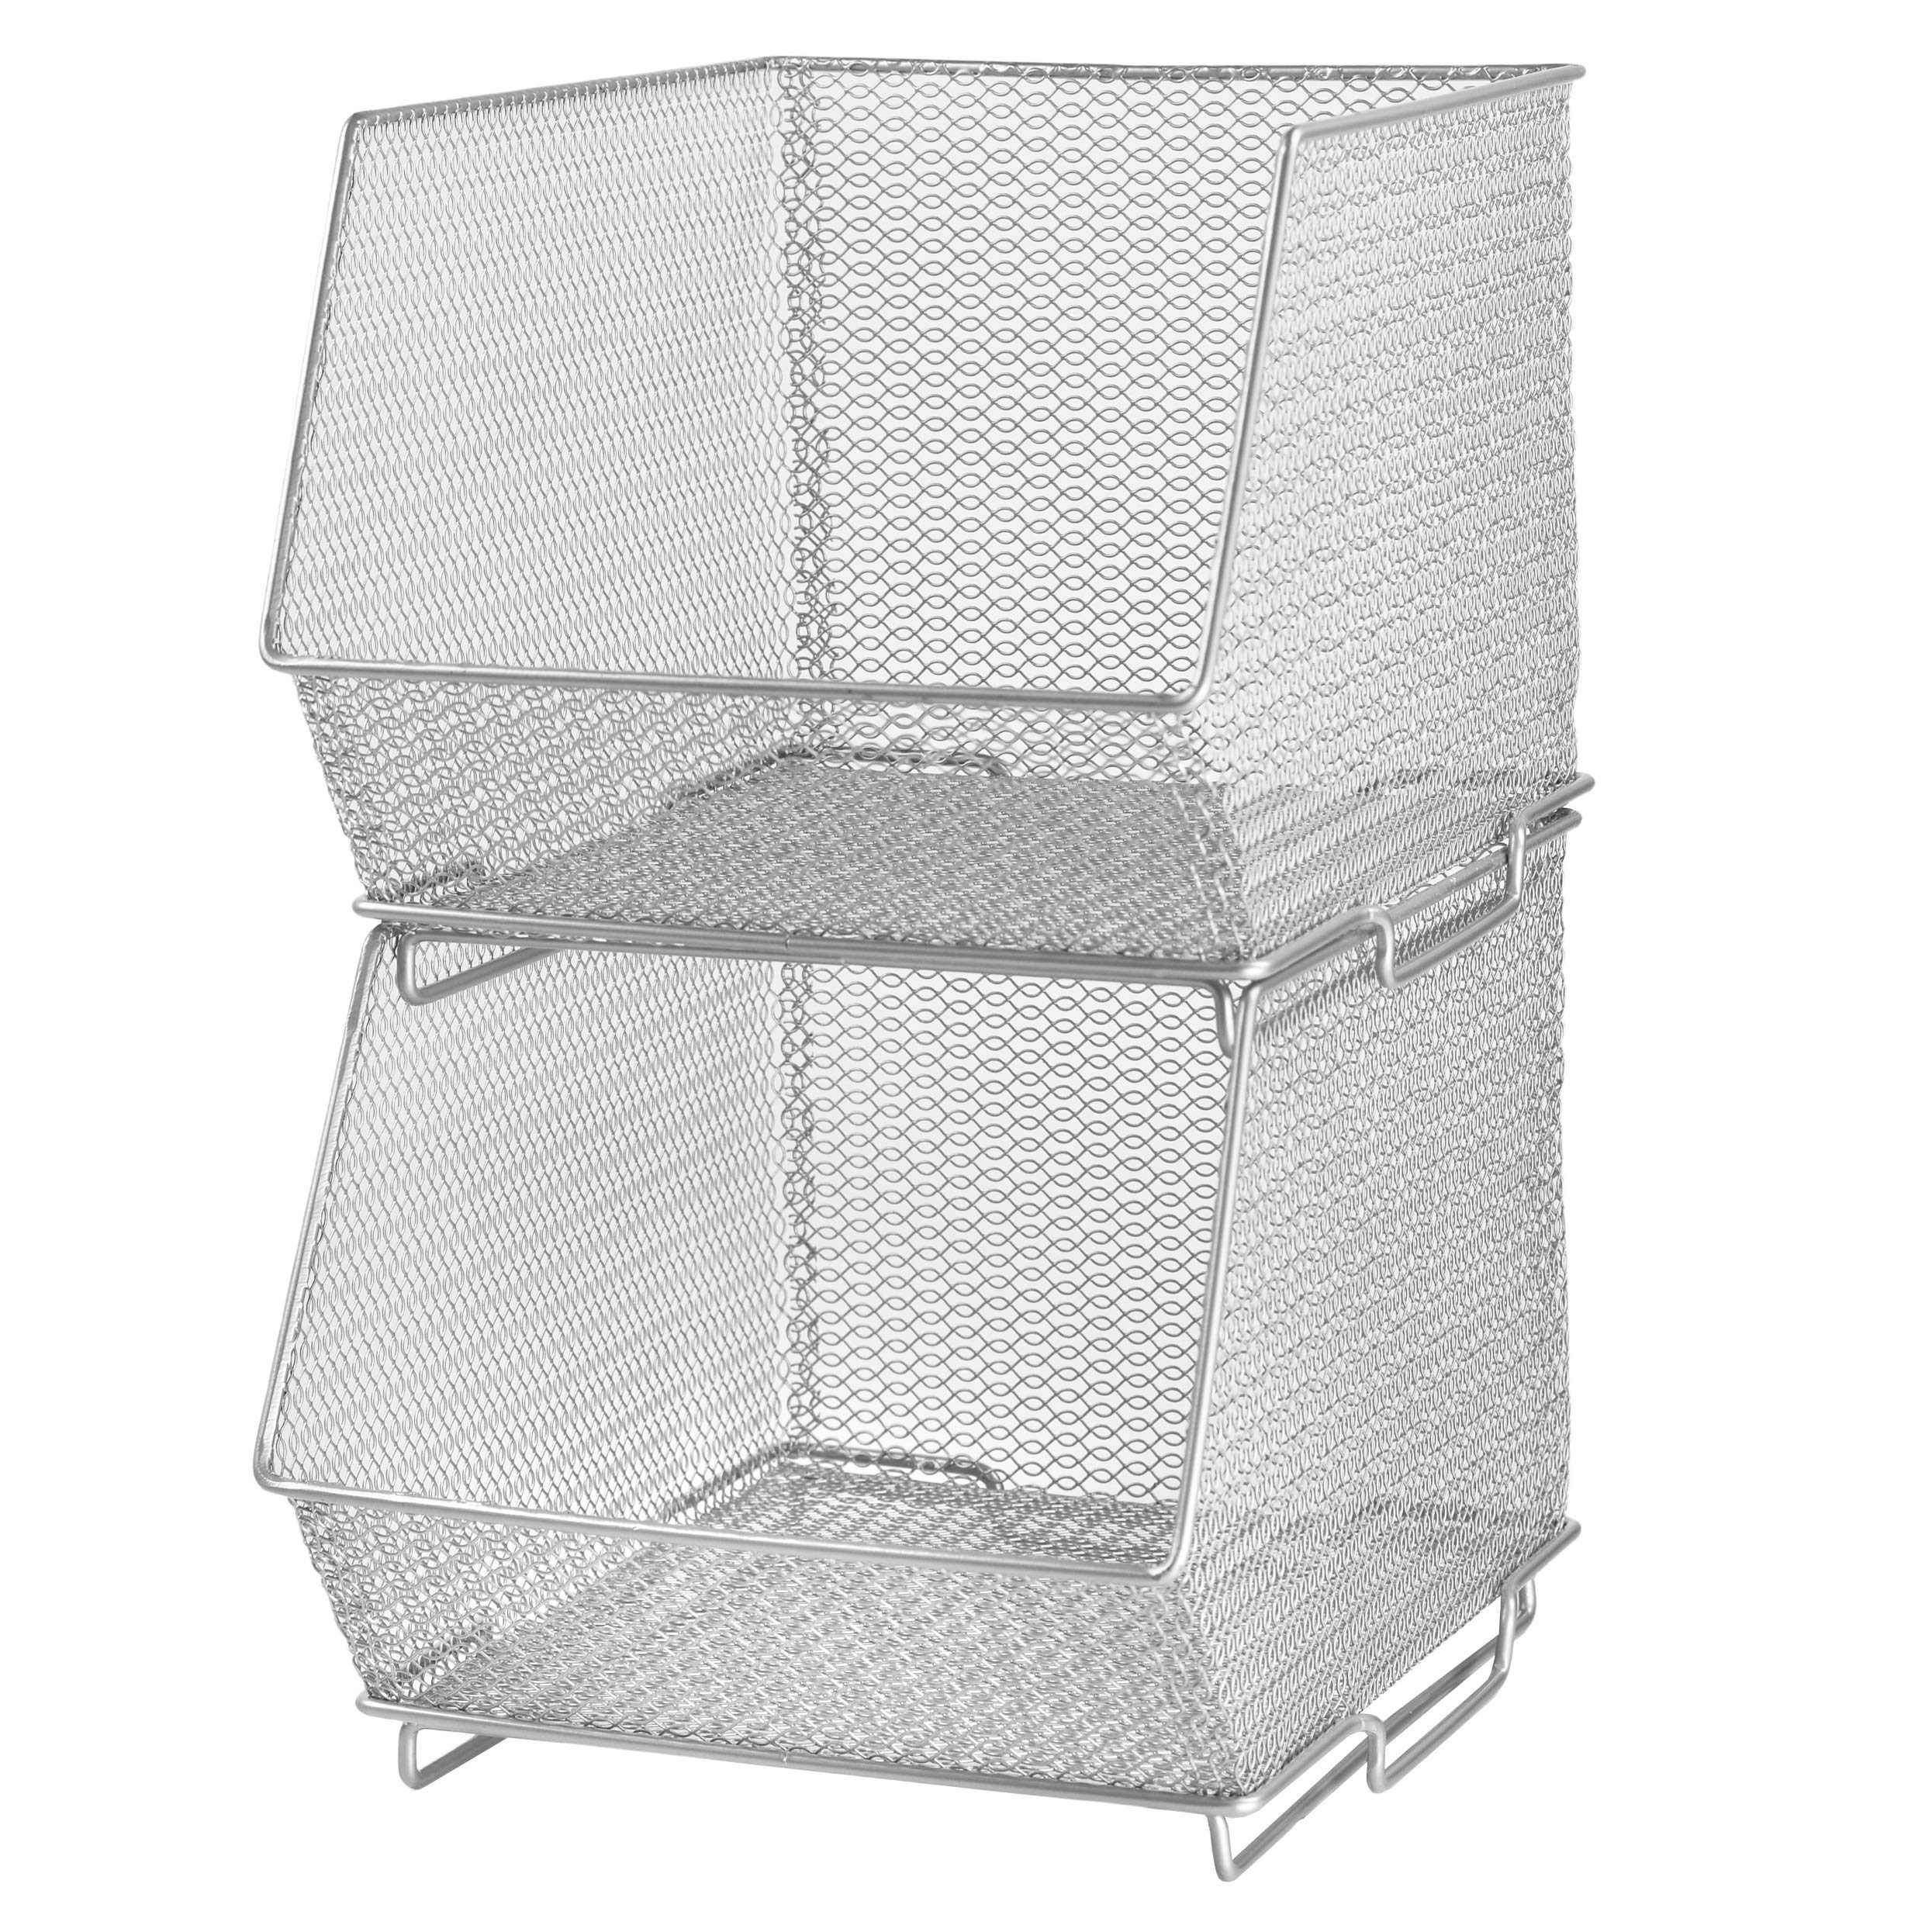 YBM HOME Mesh Stacking Bin Storage Containers for Kitchen Pantry, Cabinet and Shelves, Metal Wire Basket Rack for Fruits and Veggies, Crafts, Toys ...